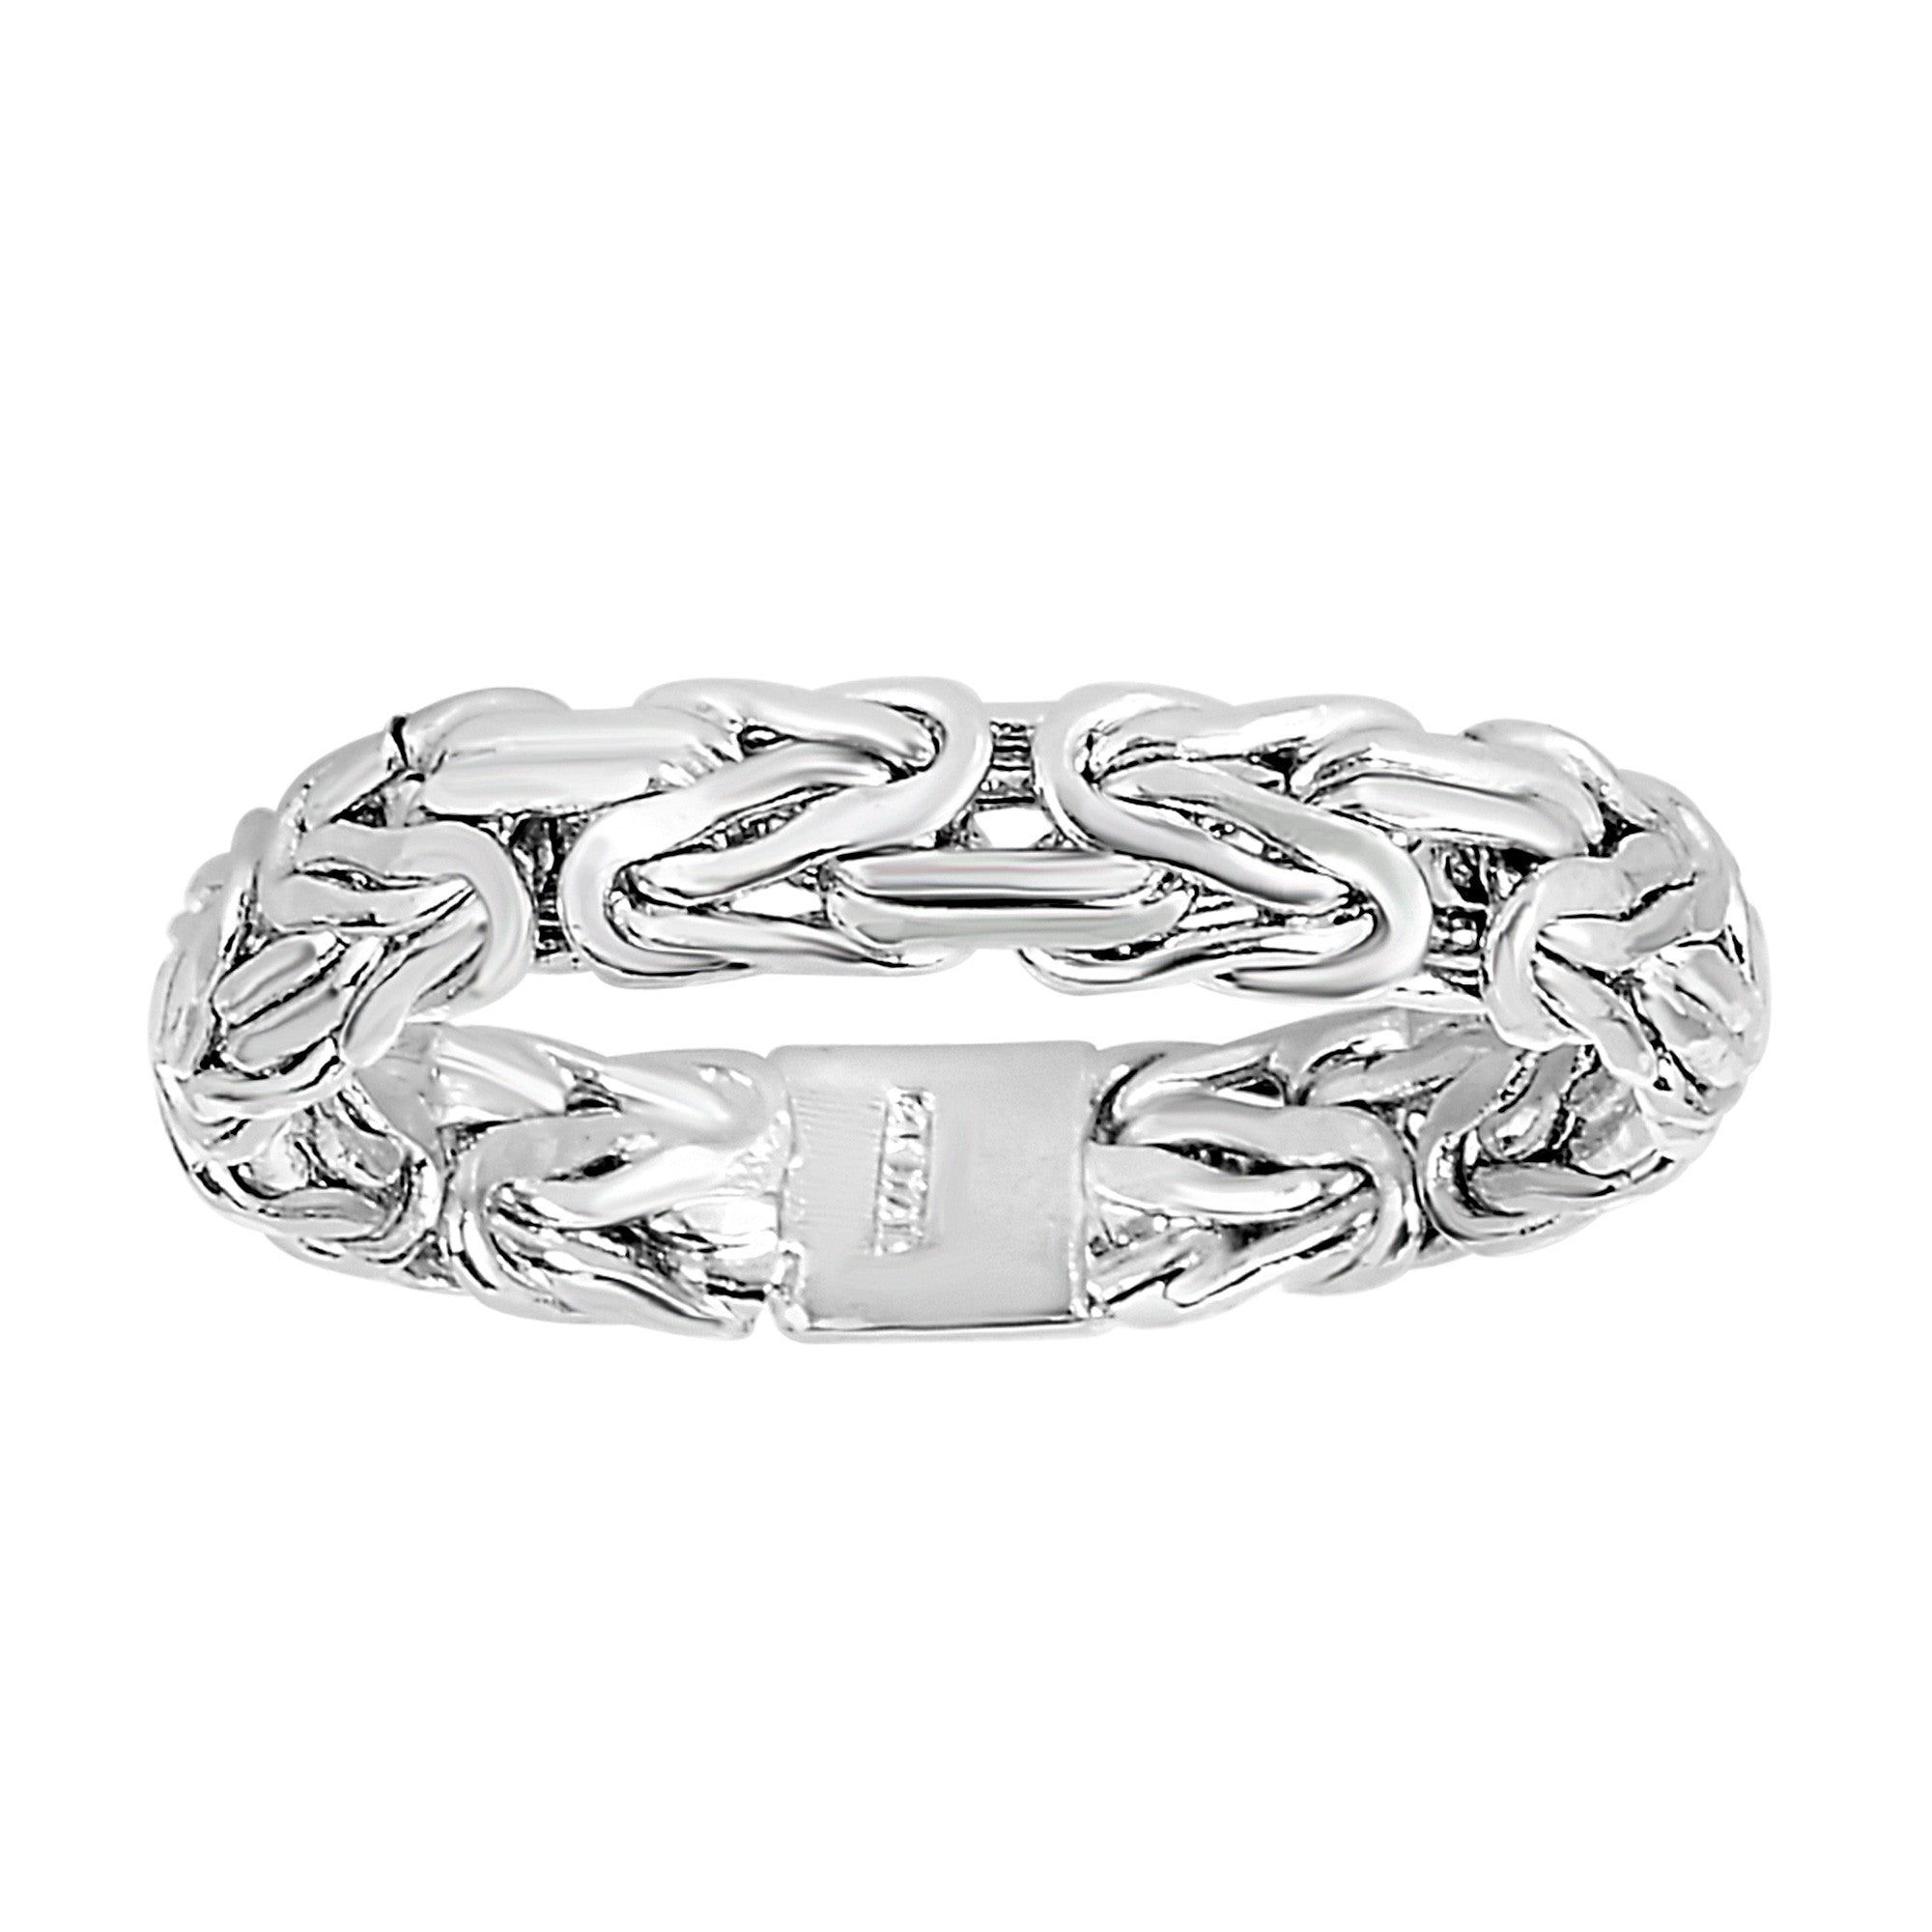 14Kt White Gold Byzantine Style Band - 4mm Wide fine designer jewelry for men and women